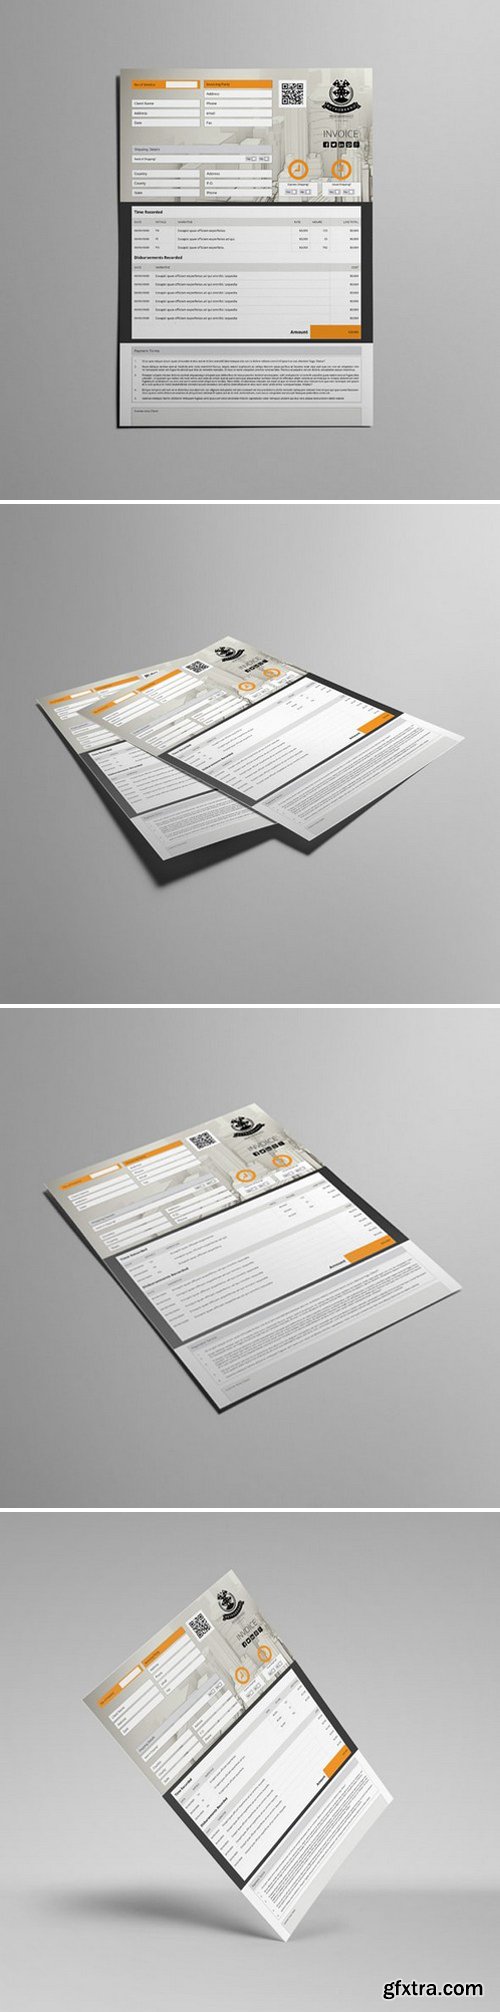 KeBoto - Business A4 Invoice Template 000110